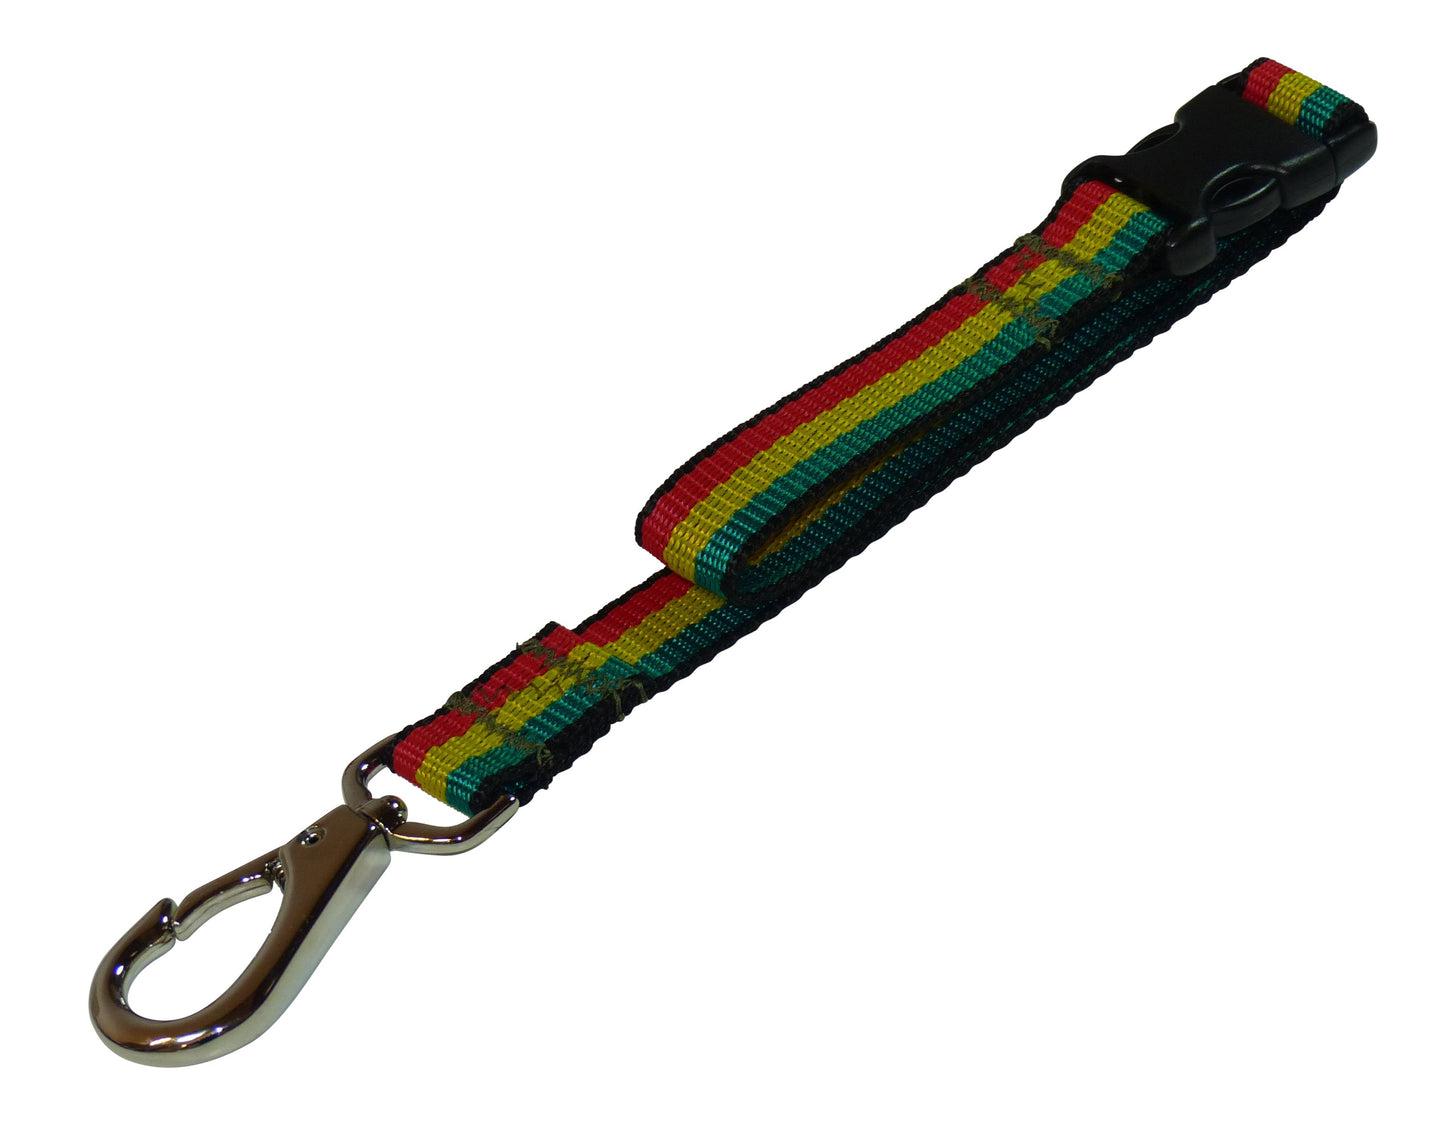 Benristraps Bag Support Strap, Pack of 2 Straps in jamaica